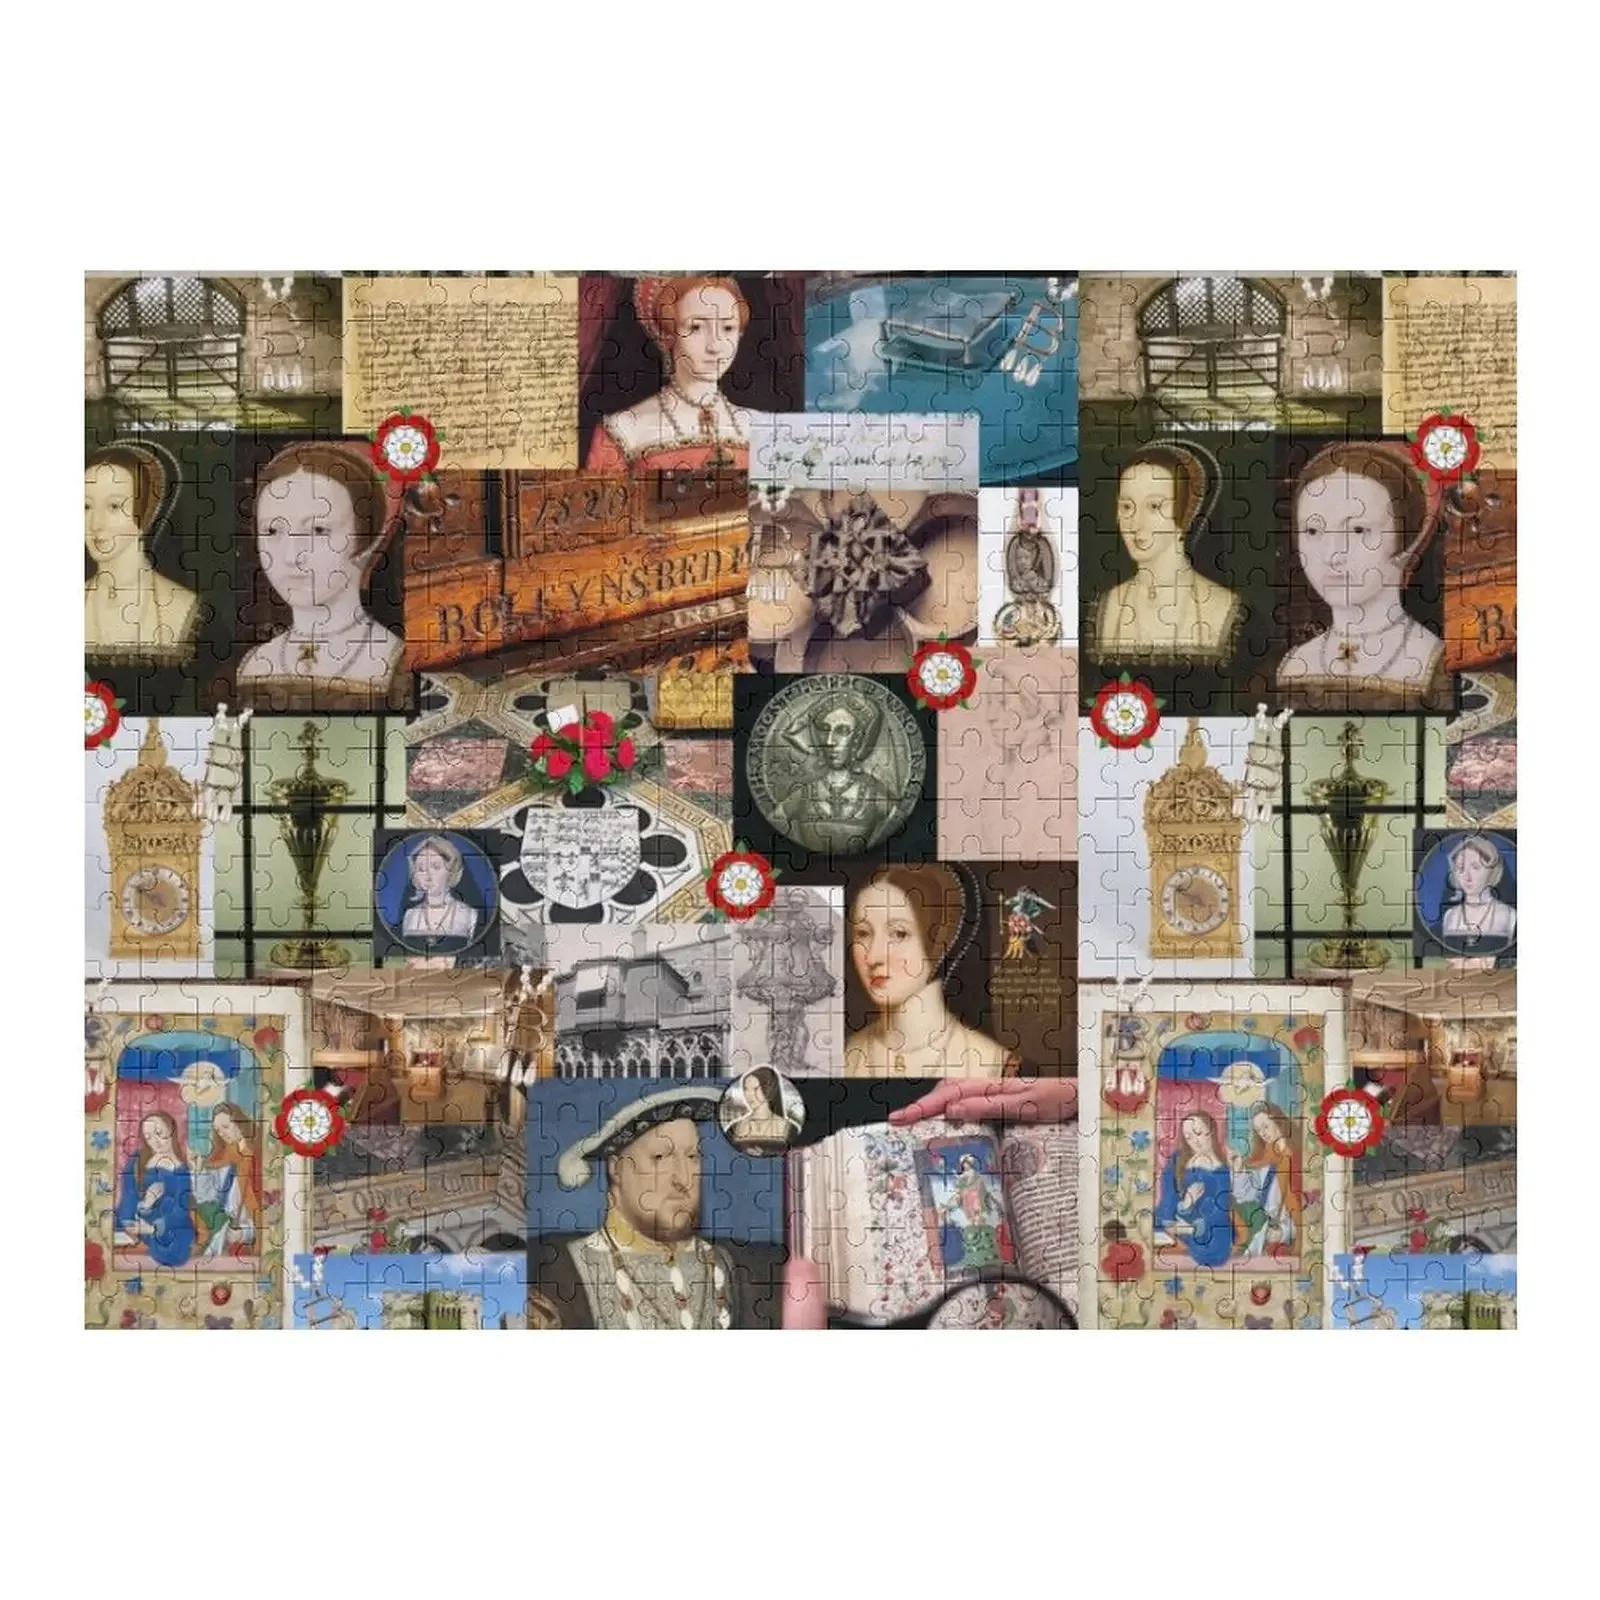 Anne Boleyn Collage Jigsaw Puzzle Woodens For Adults Wooden Decor Paintings Name Wooden Toy Puzzle six the musical queens portraits aragon boleyn seymour cleves howard parr jigsaw puzzle wood animals puzzle